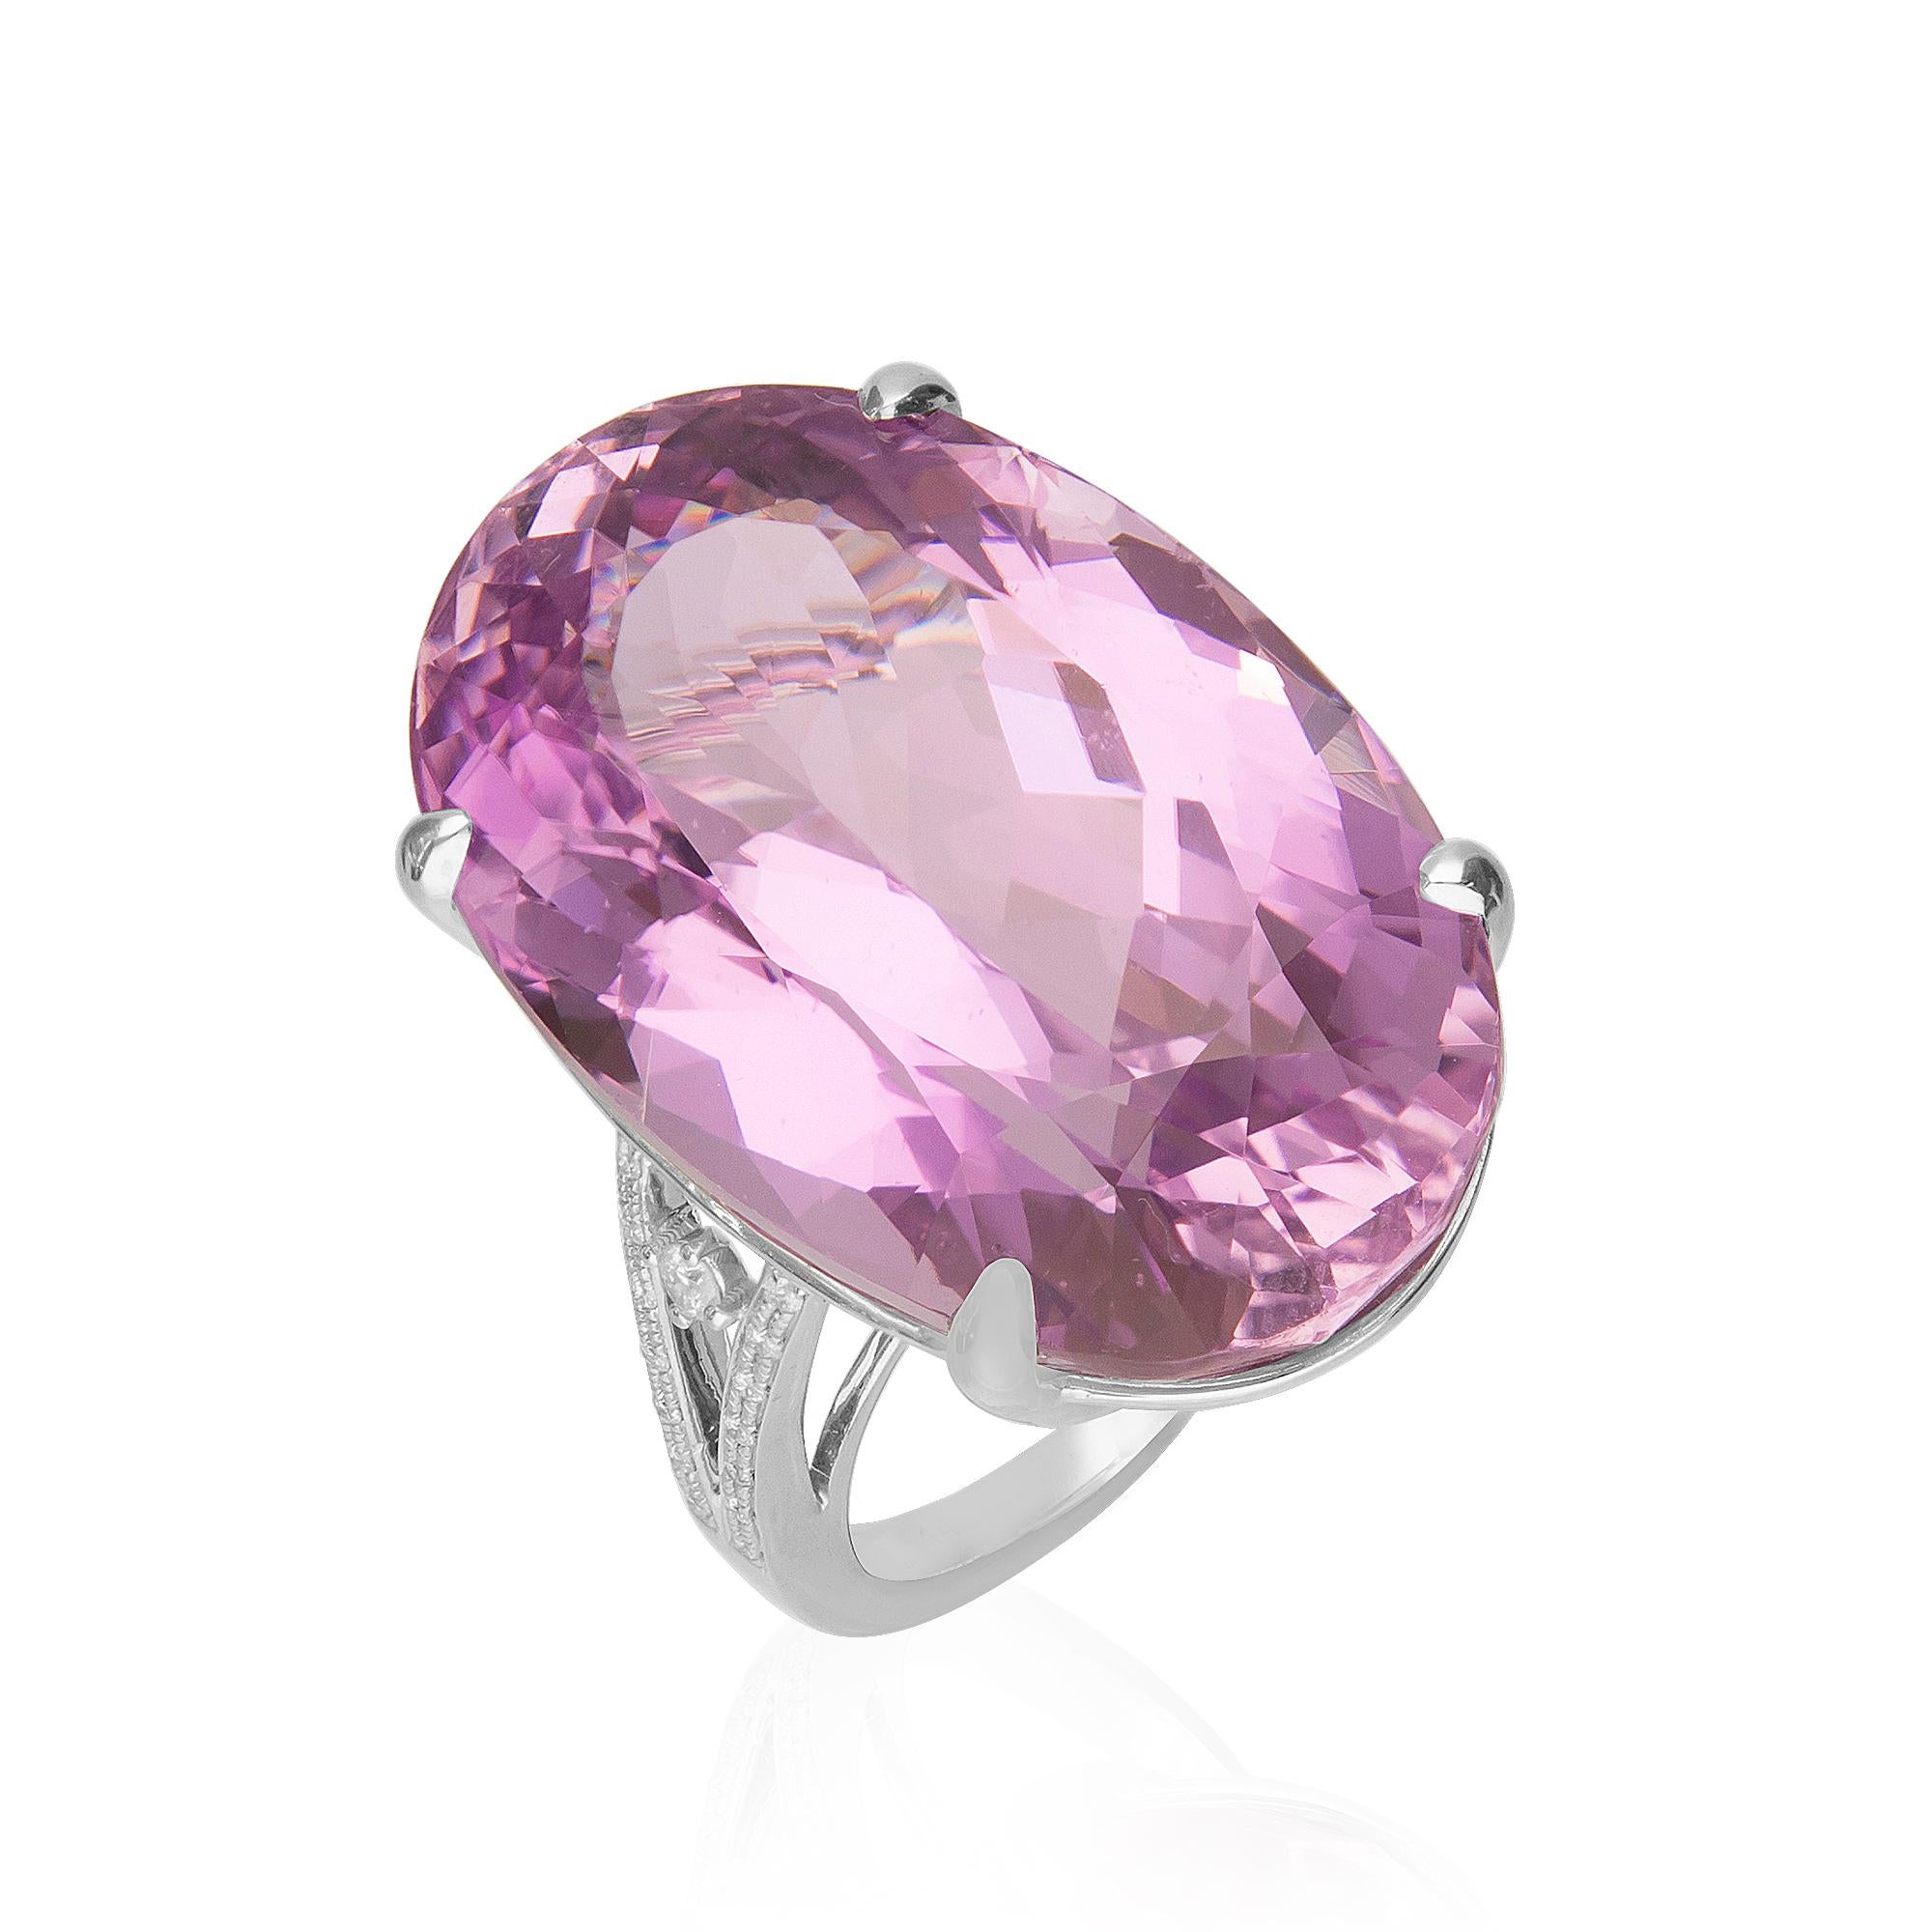 Make a statement with our Cirari Kunzite and diamond ring crafted of 14k white gold. This jewelry is the ideal way to showcase your bold style. This ring features an oval cut kunzite weighing a massive 47 1/8 carats as well as 1/6 carat of